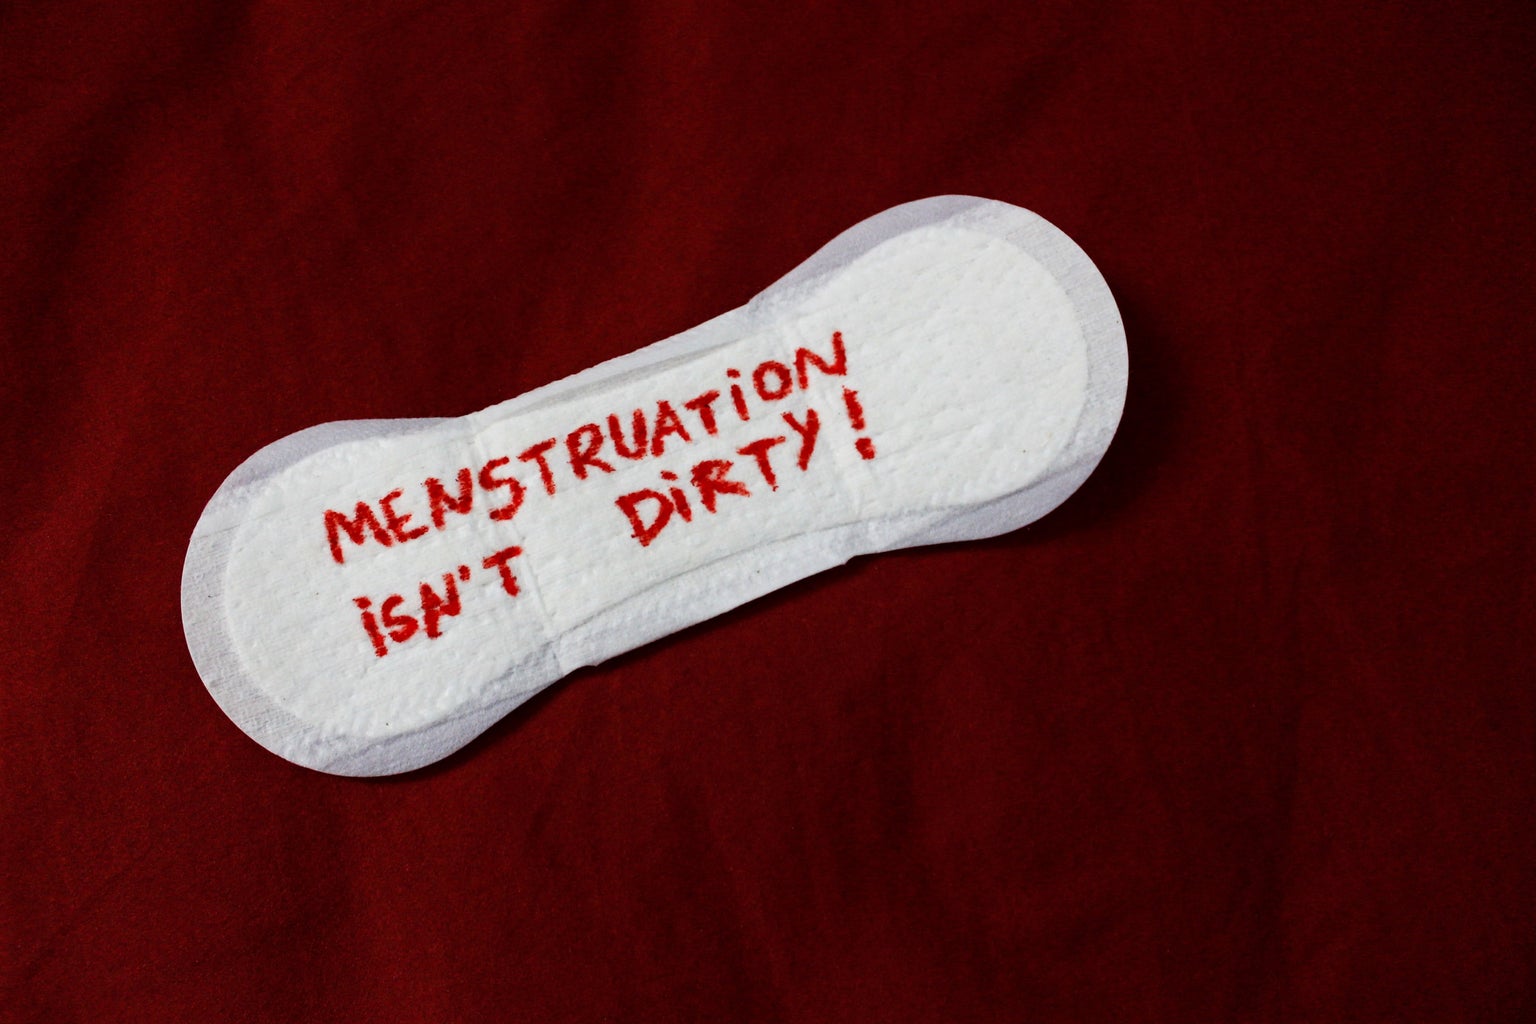 Menstrual pad for period